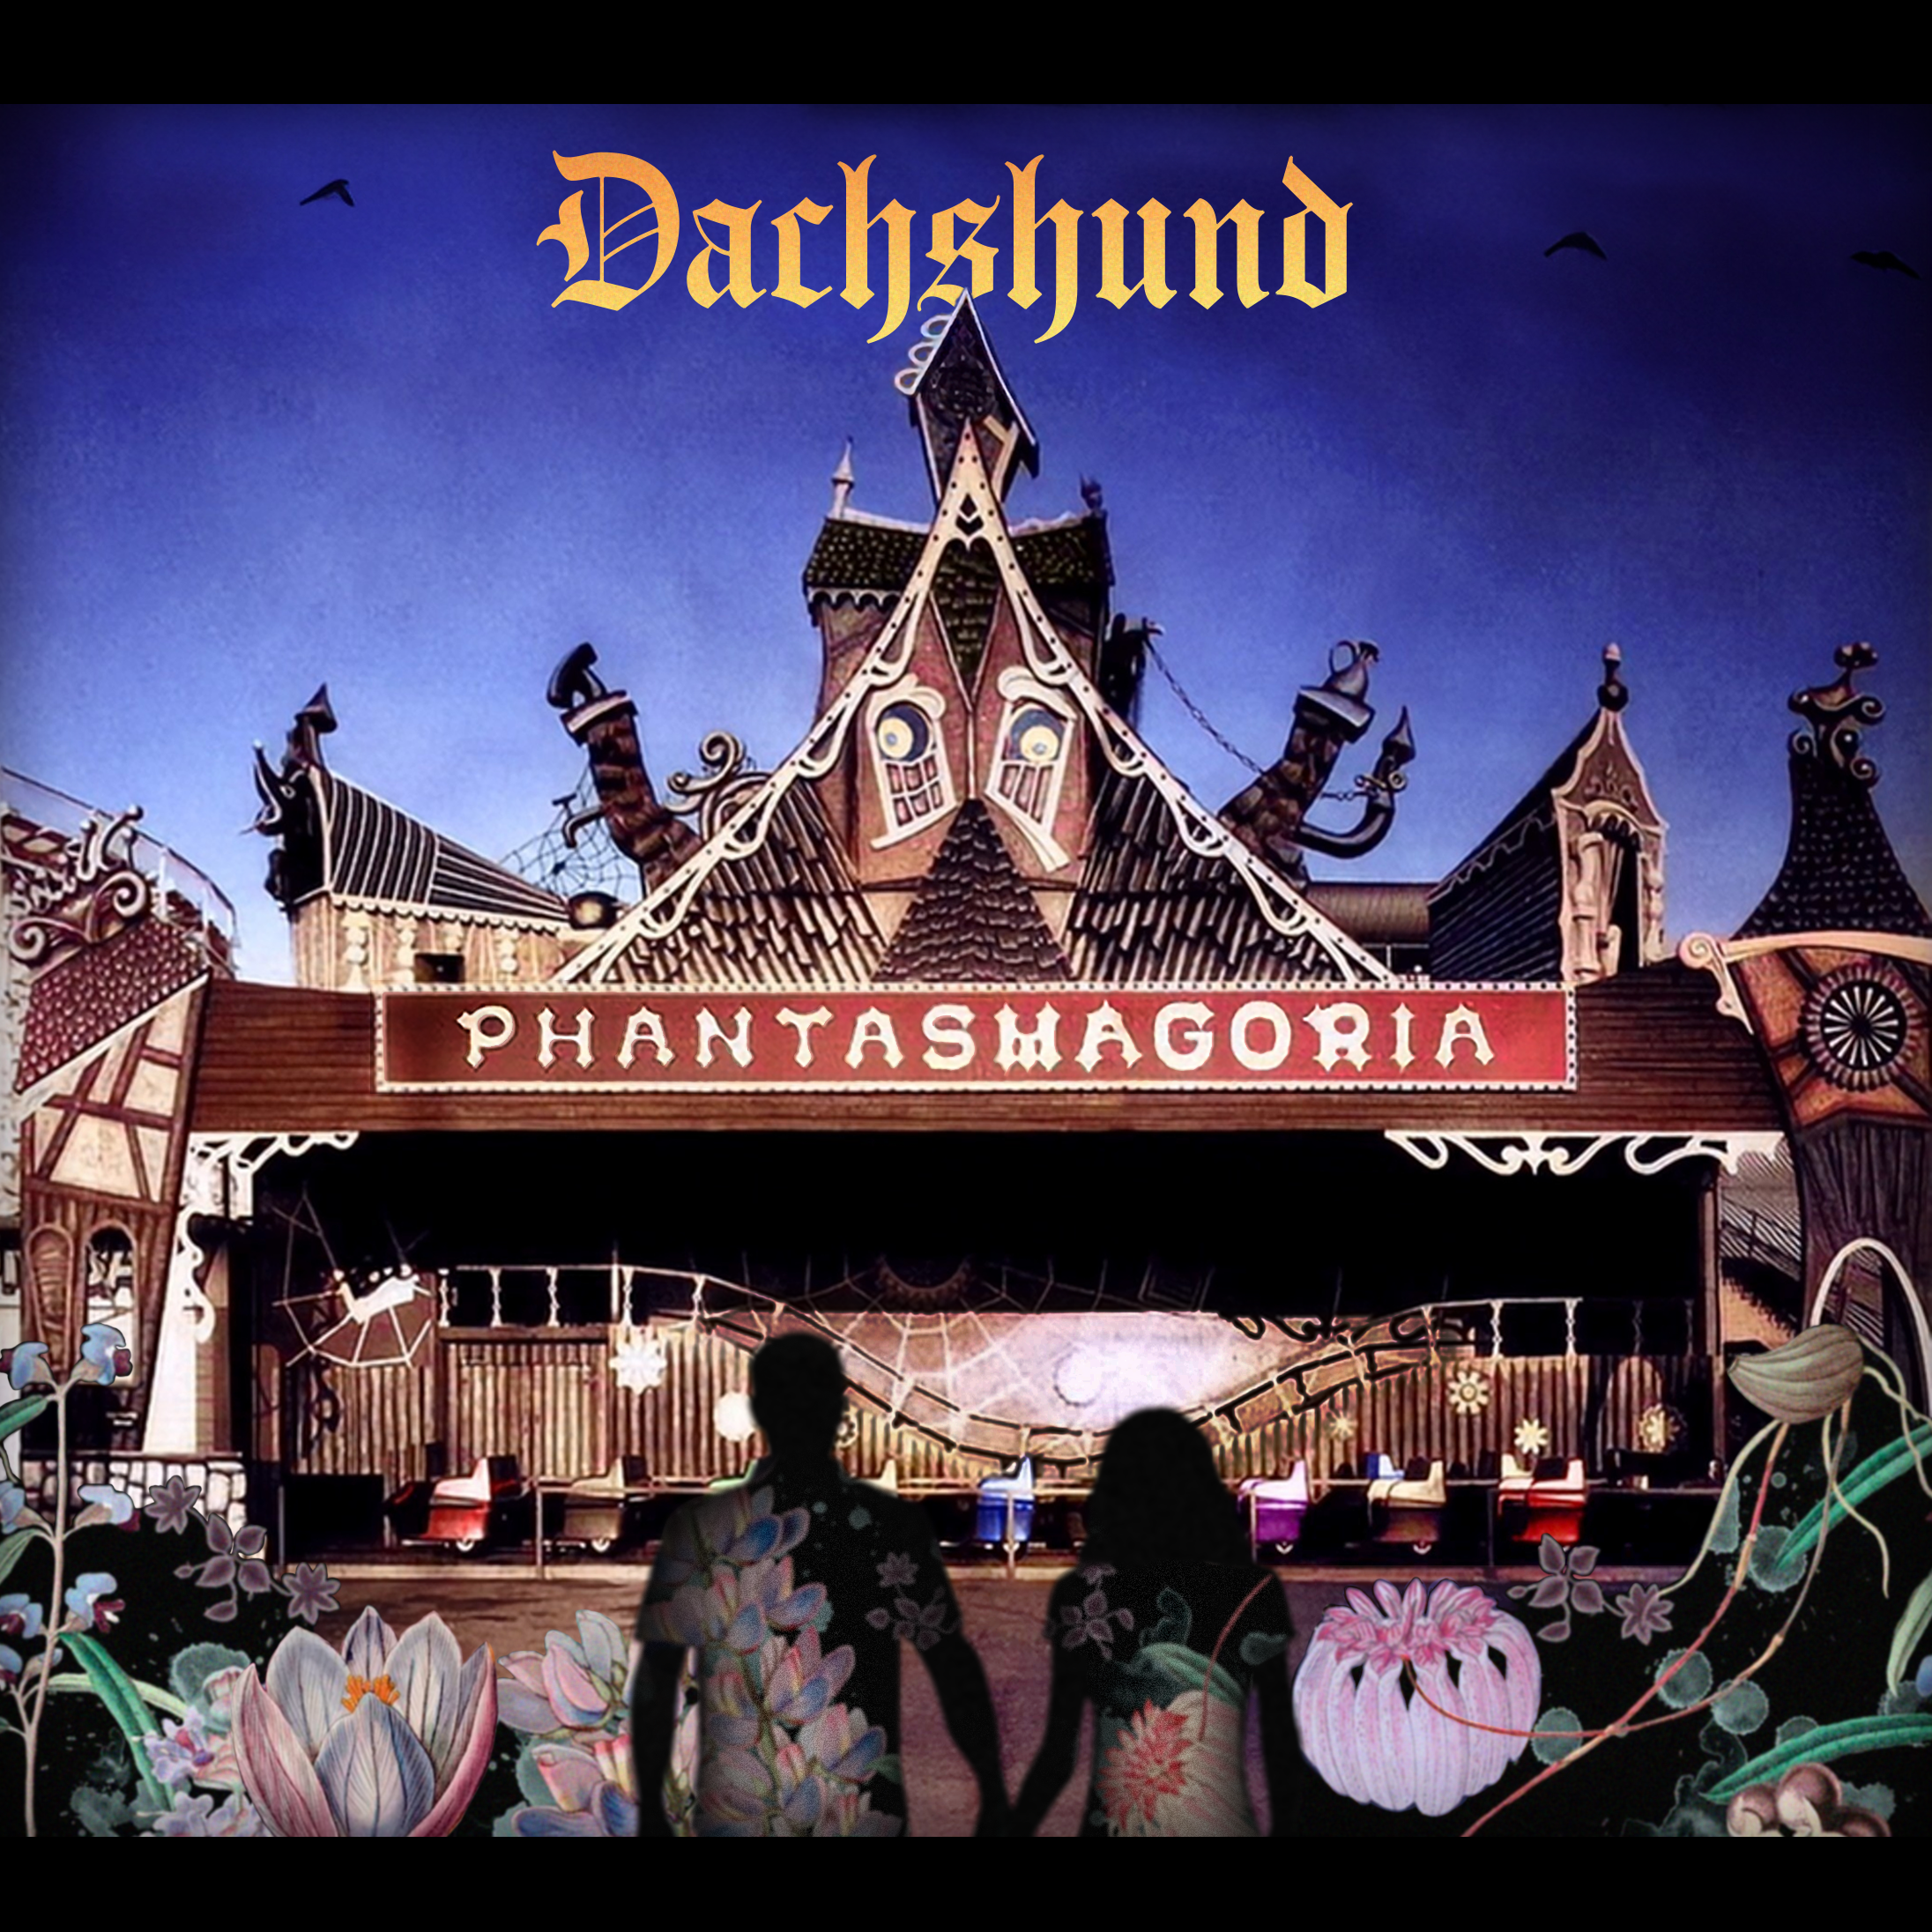 A depiction of the "Phantasmagoria" Album Cover: A photograph of a couple leaving a fantastical garden to approach an elaborate haunted-house amusement-ride. On either side of the cover rests an oversized carnival-ticket.